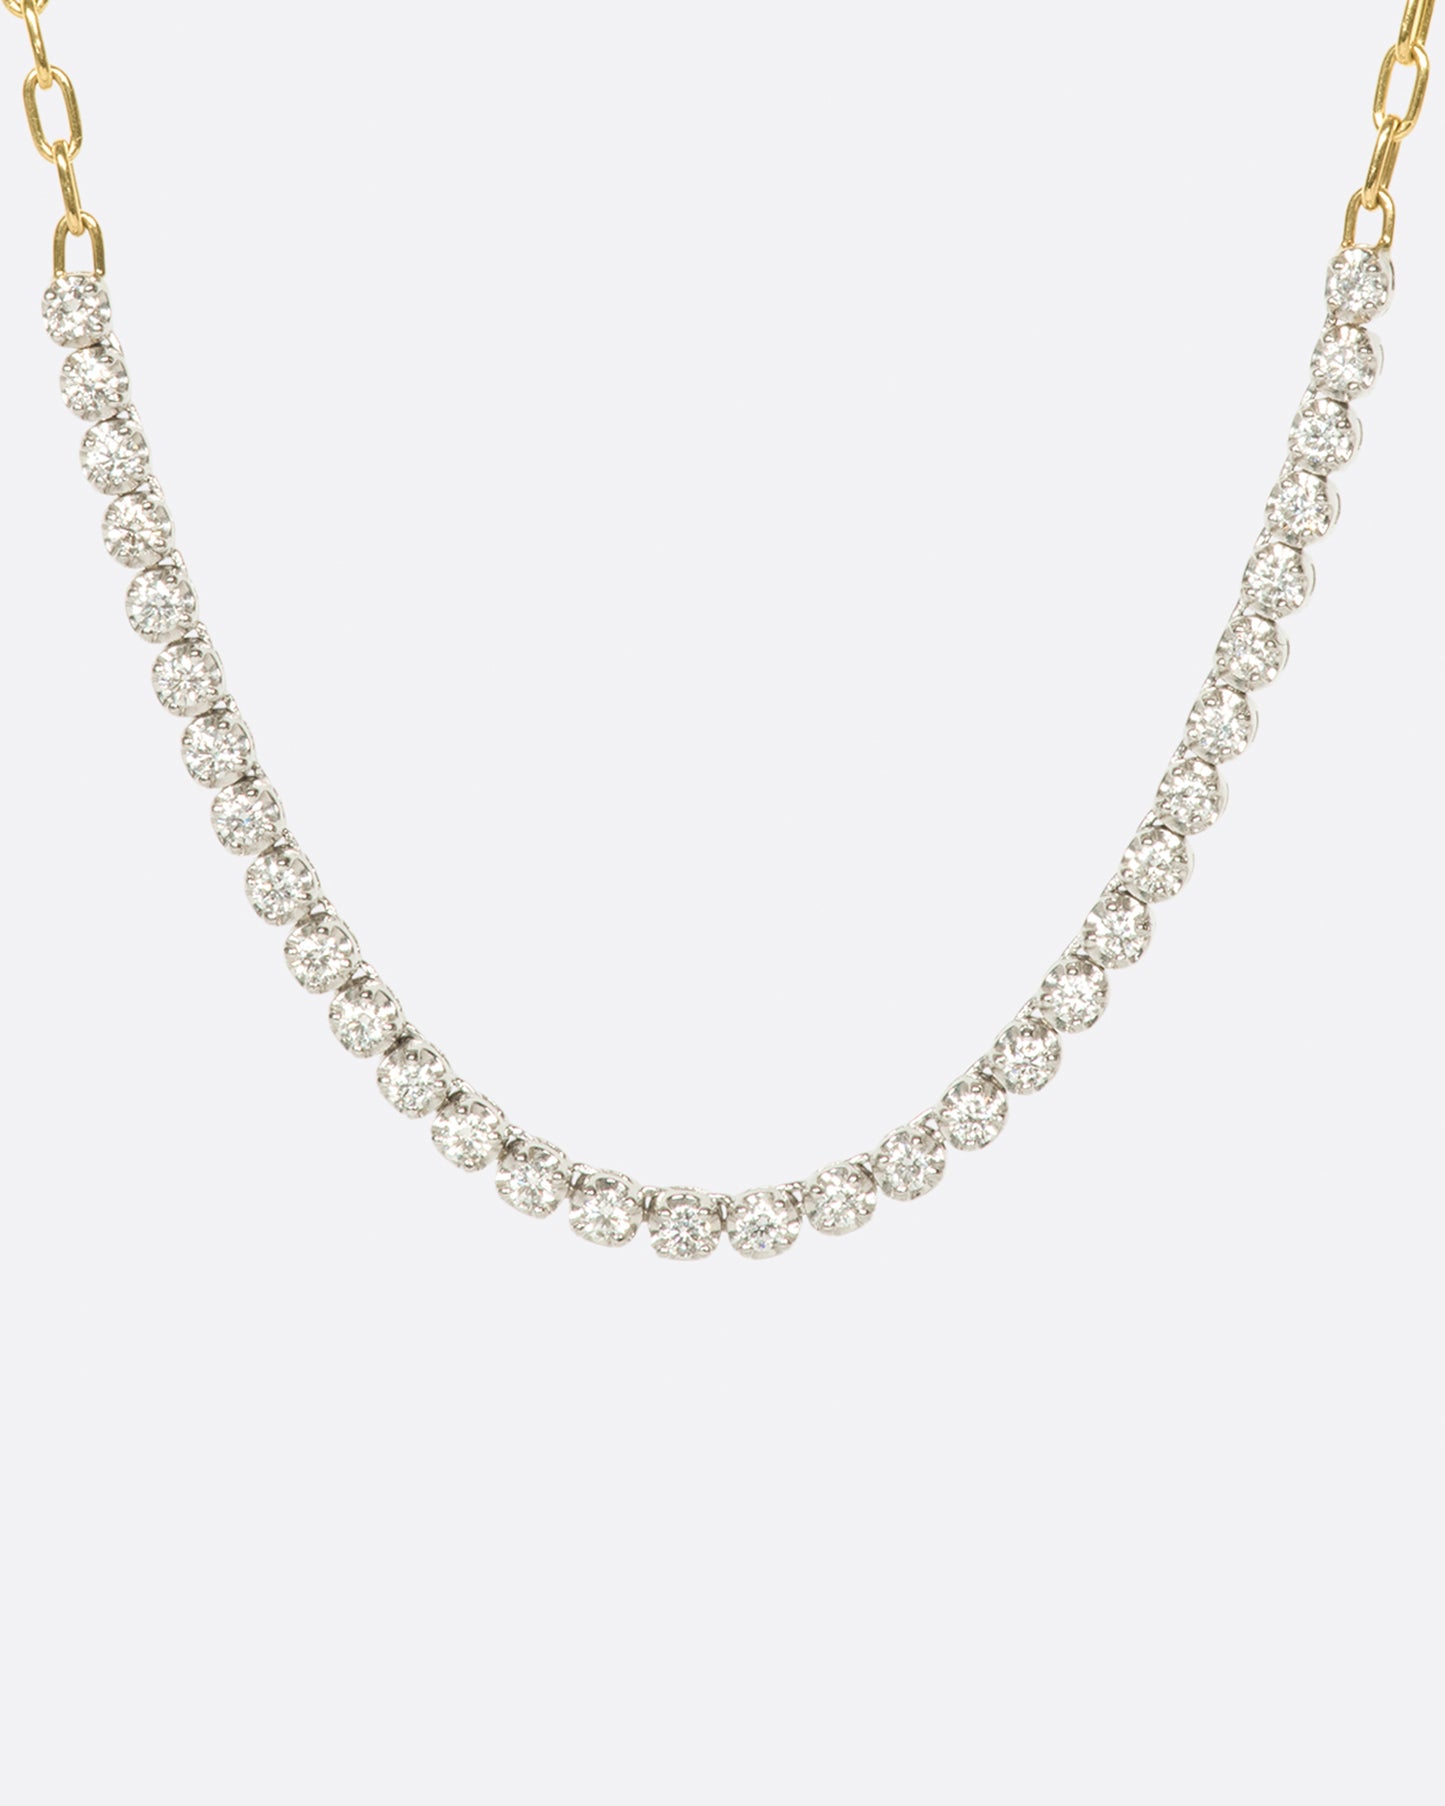 A yellow gold, oval link, chain necklace with four inches of contrasting white diamonds